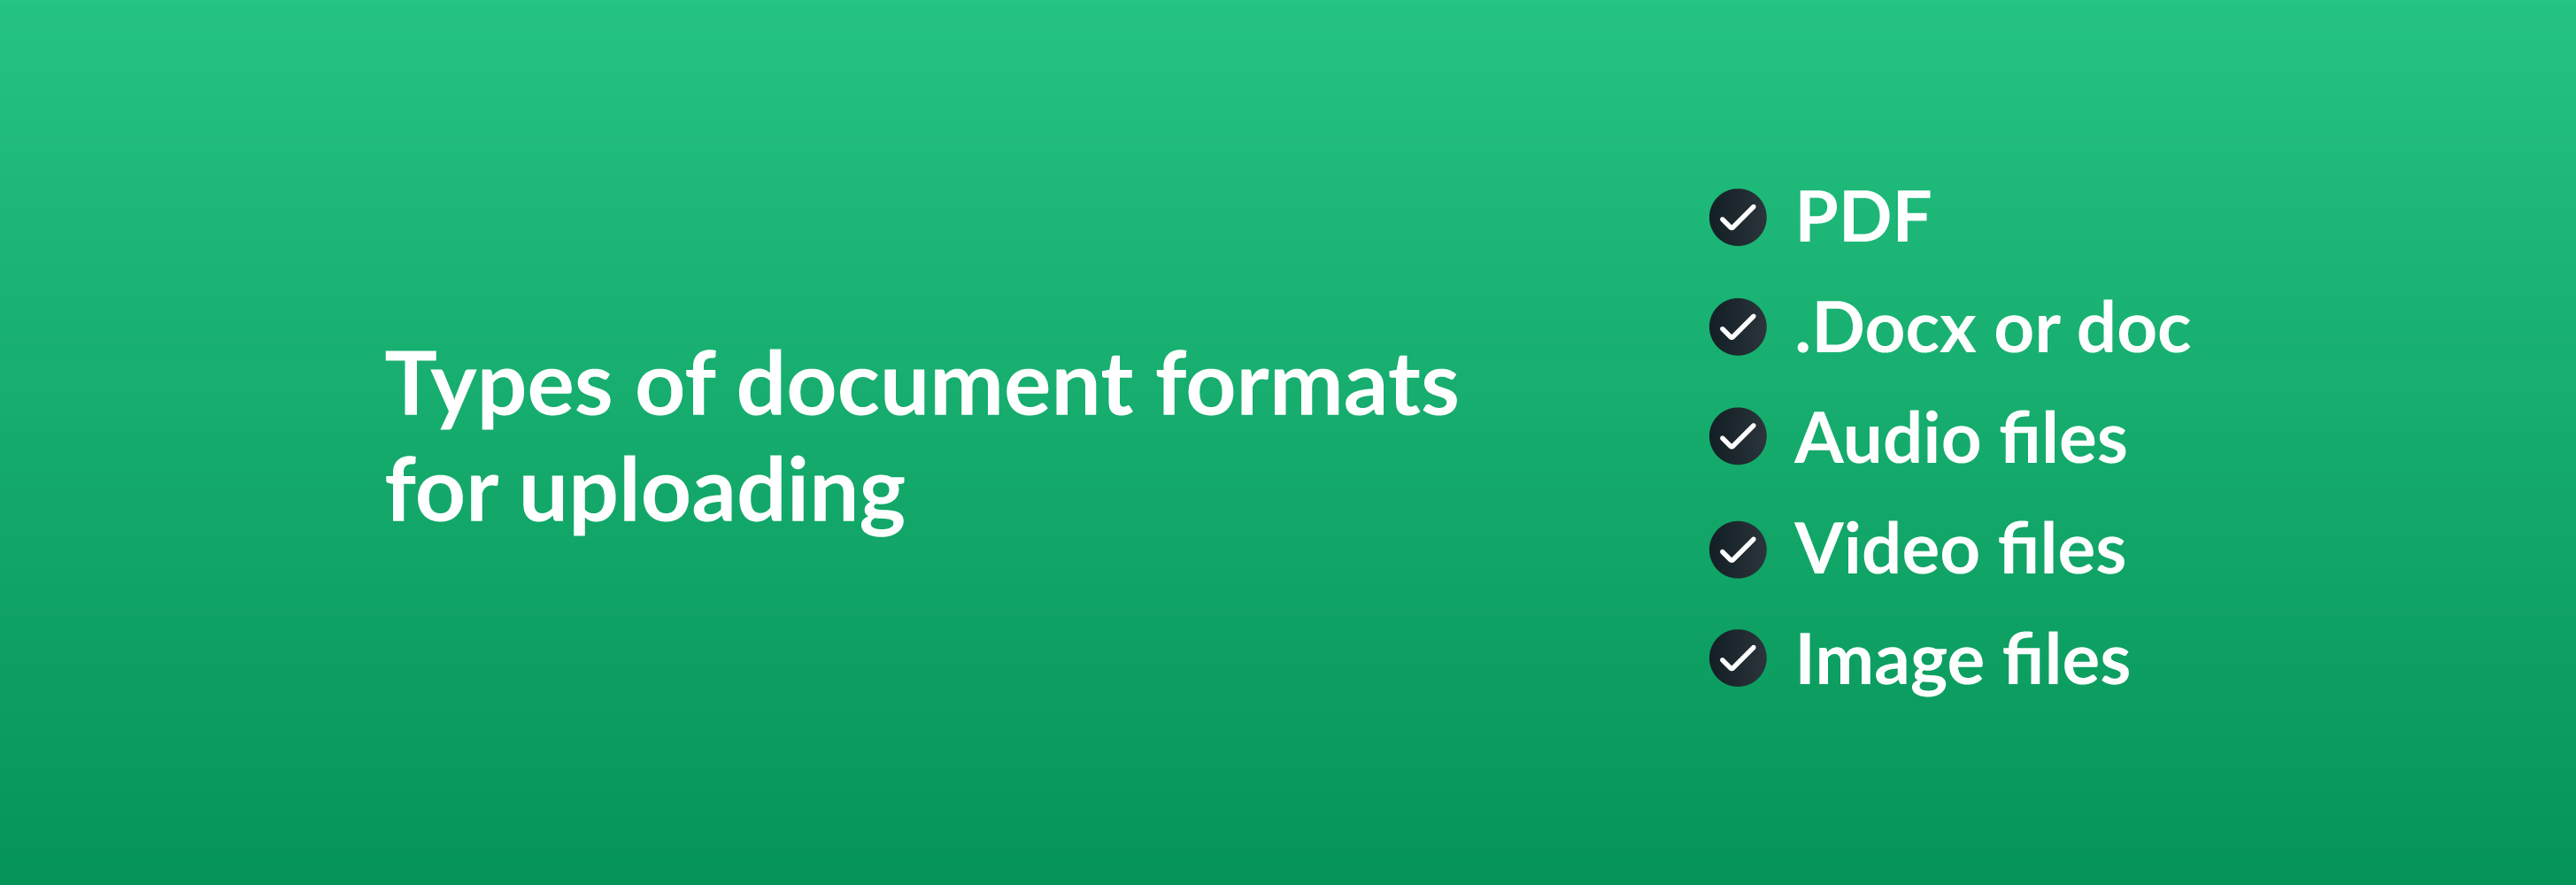 Types of document formats for uploading - PDF, .docx or doc, audio files, video files, image files